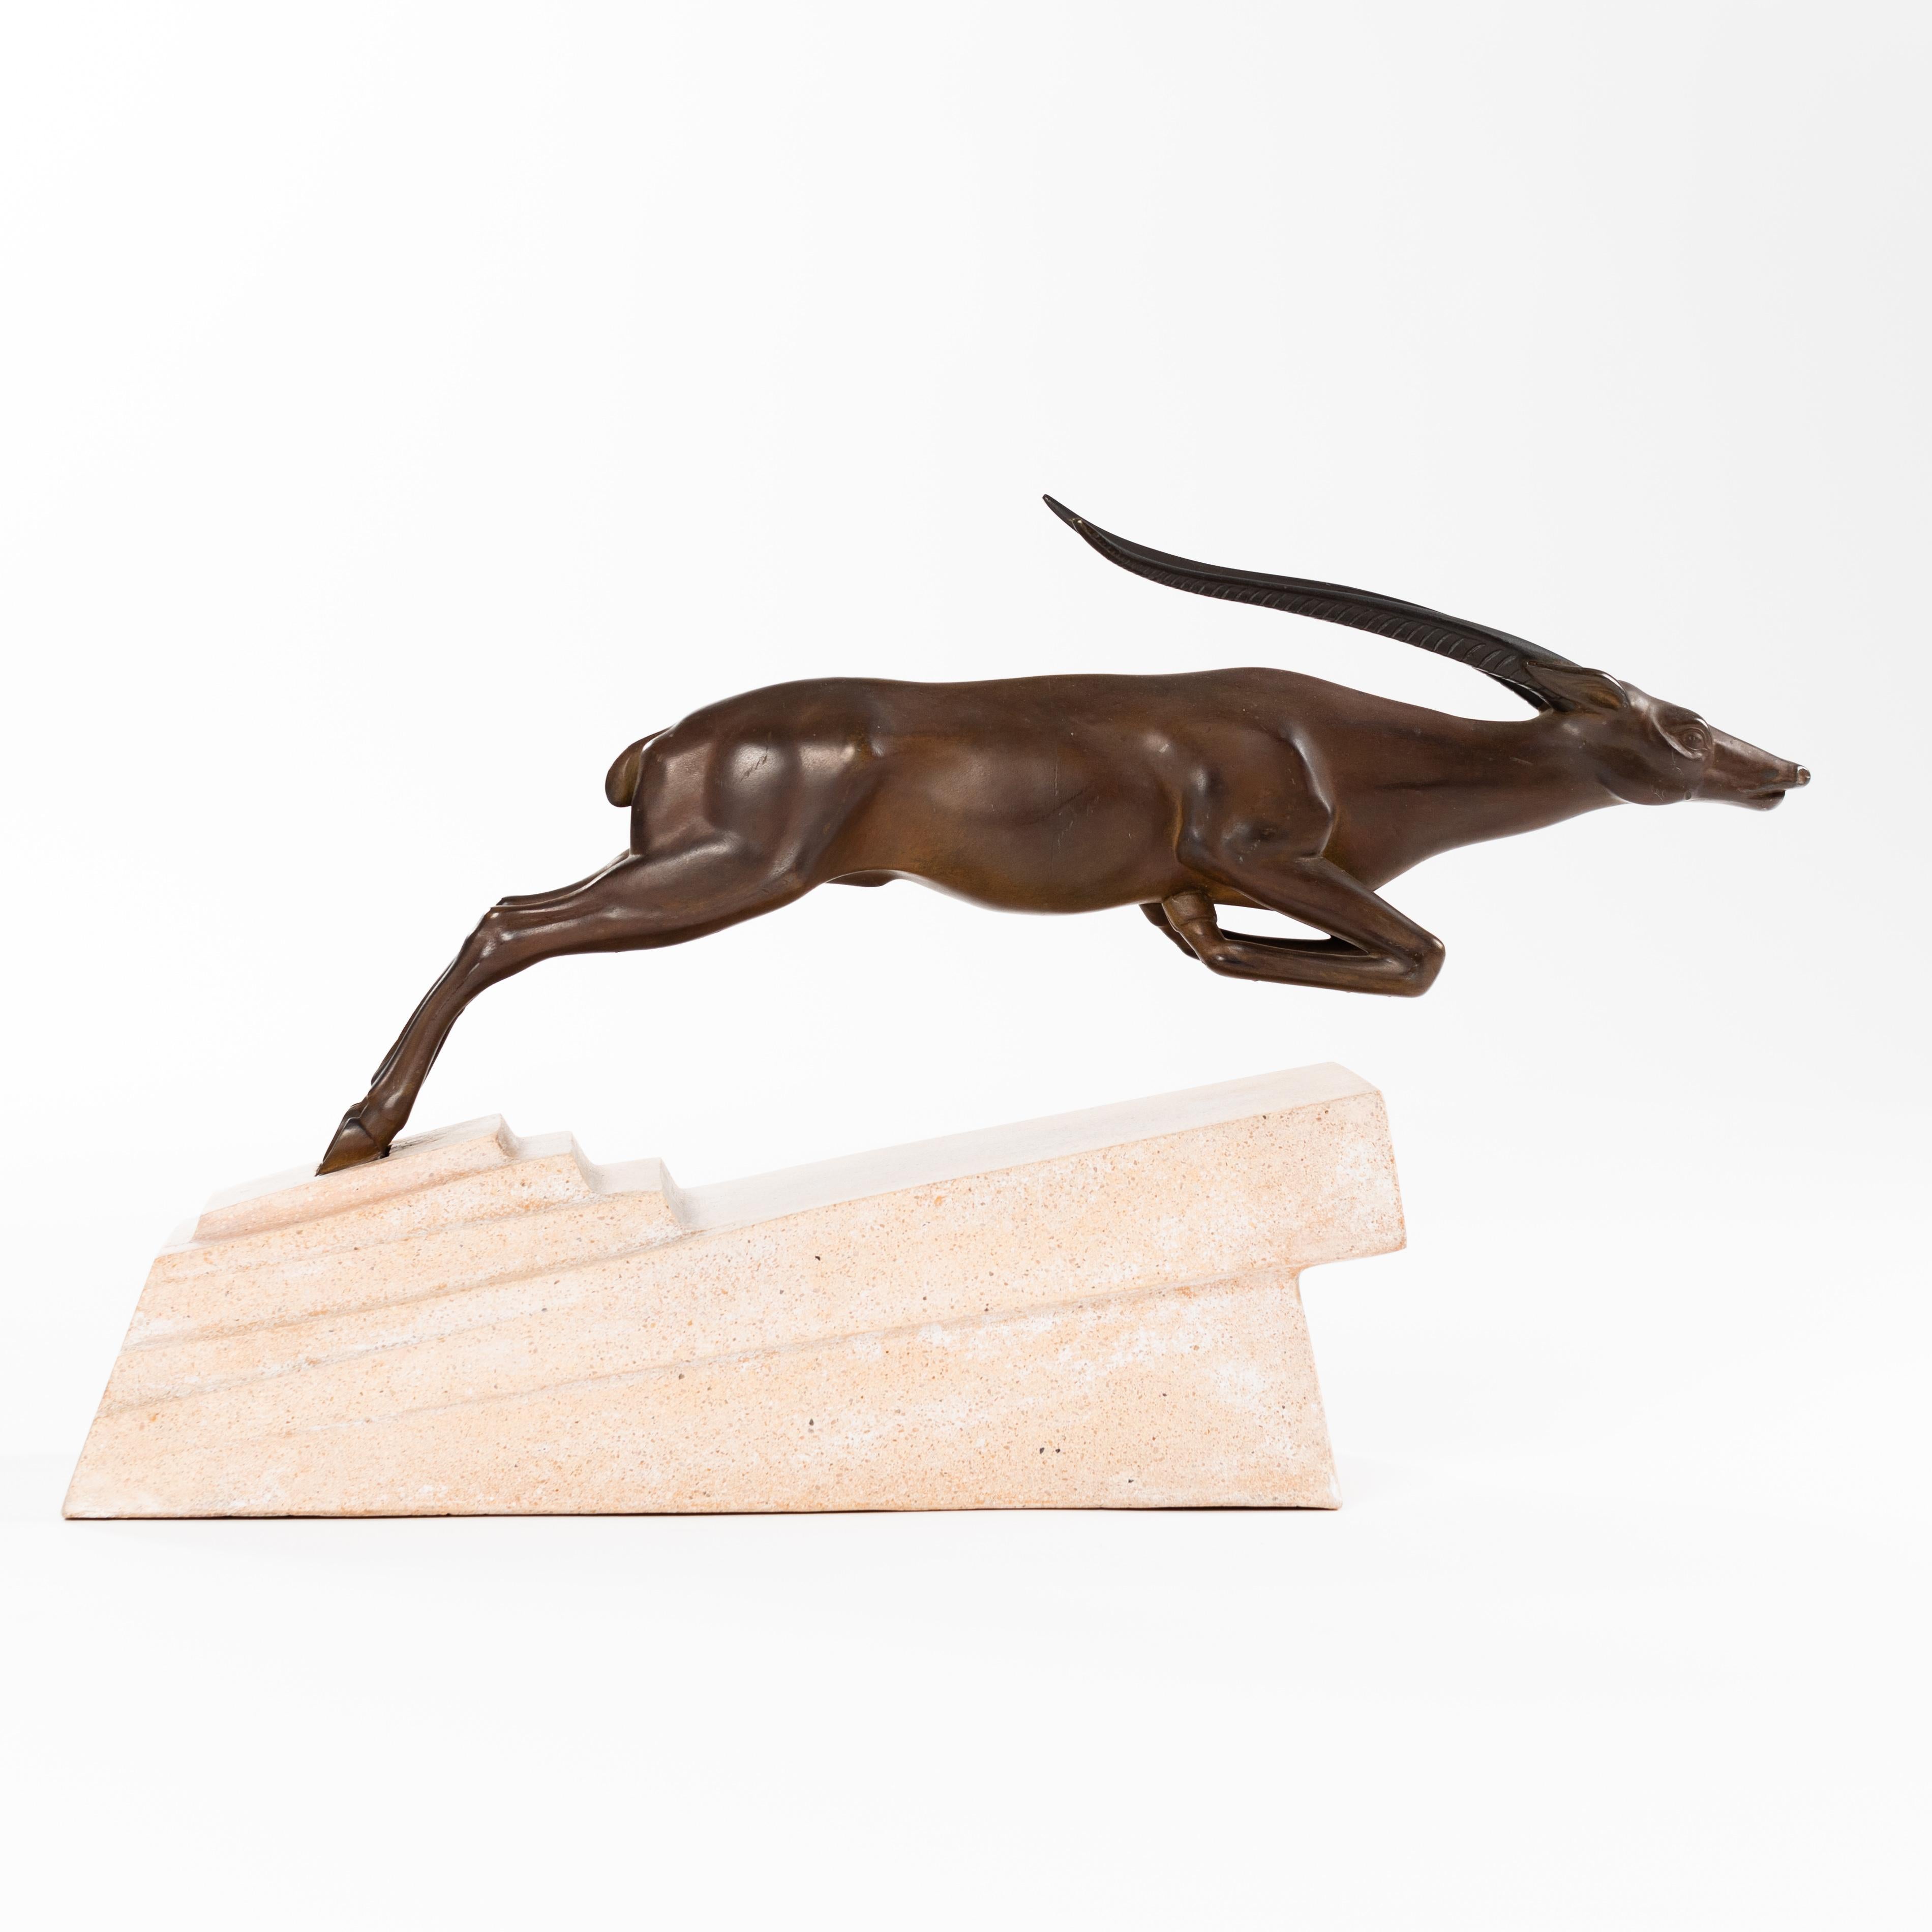 Very finely crafted bronze sculpture from the period of French Art Deco.
Attributed to the sculptur Max Le Verrier.

The antelope is jumping, the dynamics and movement of the animal is very well captured in the depiction.
The bronze is brown, the